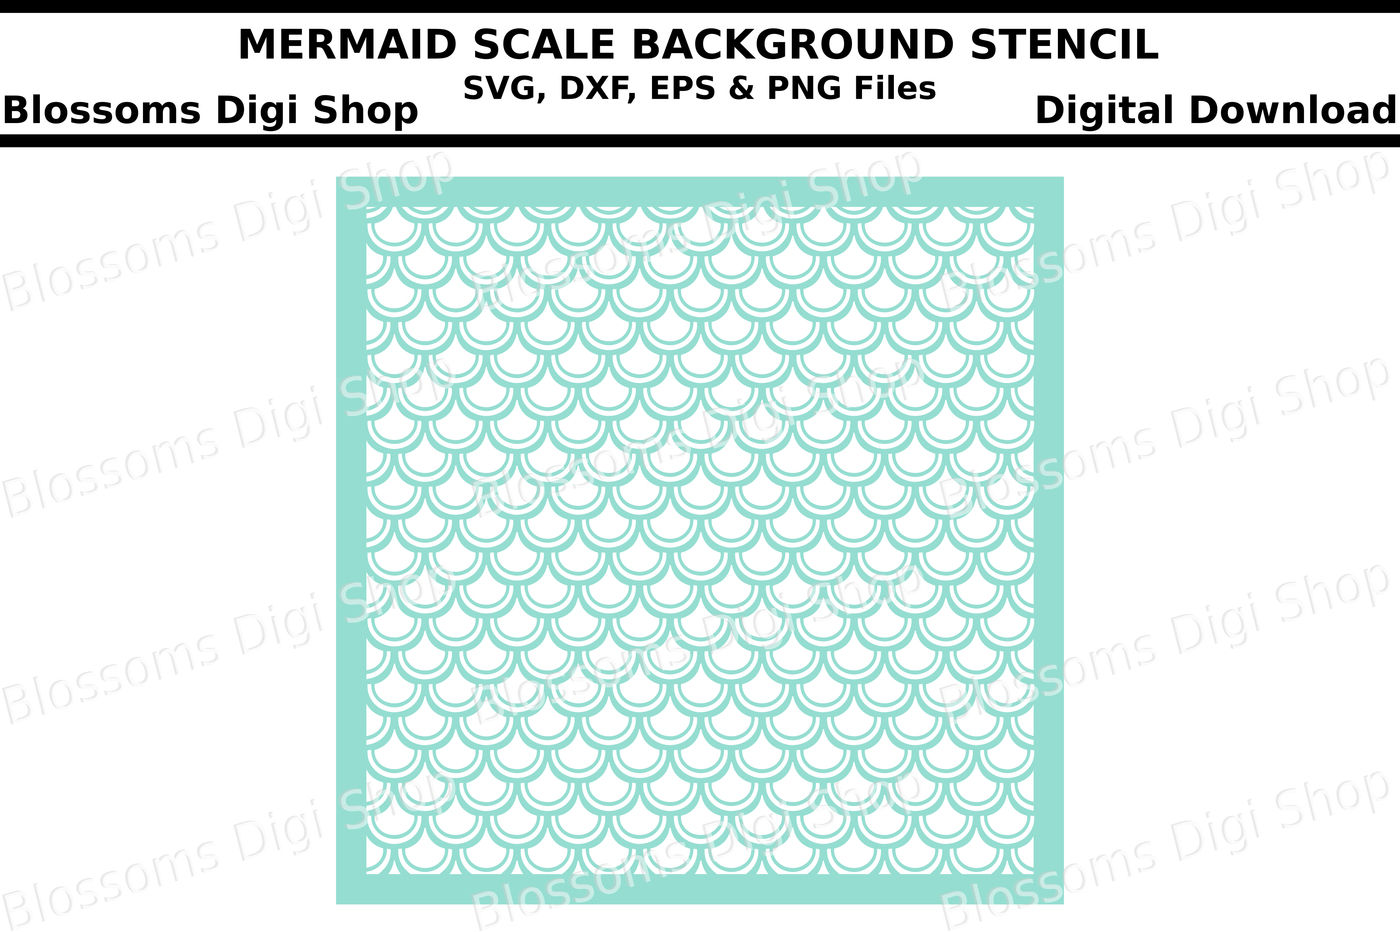 Mermaid Scales Background Svg Dxf Eps And Png Cut Files By Blossoms Digi Shop Thehungryjpeg Com